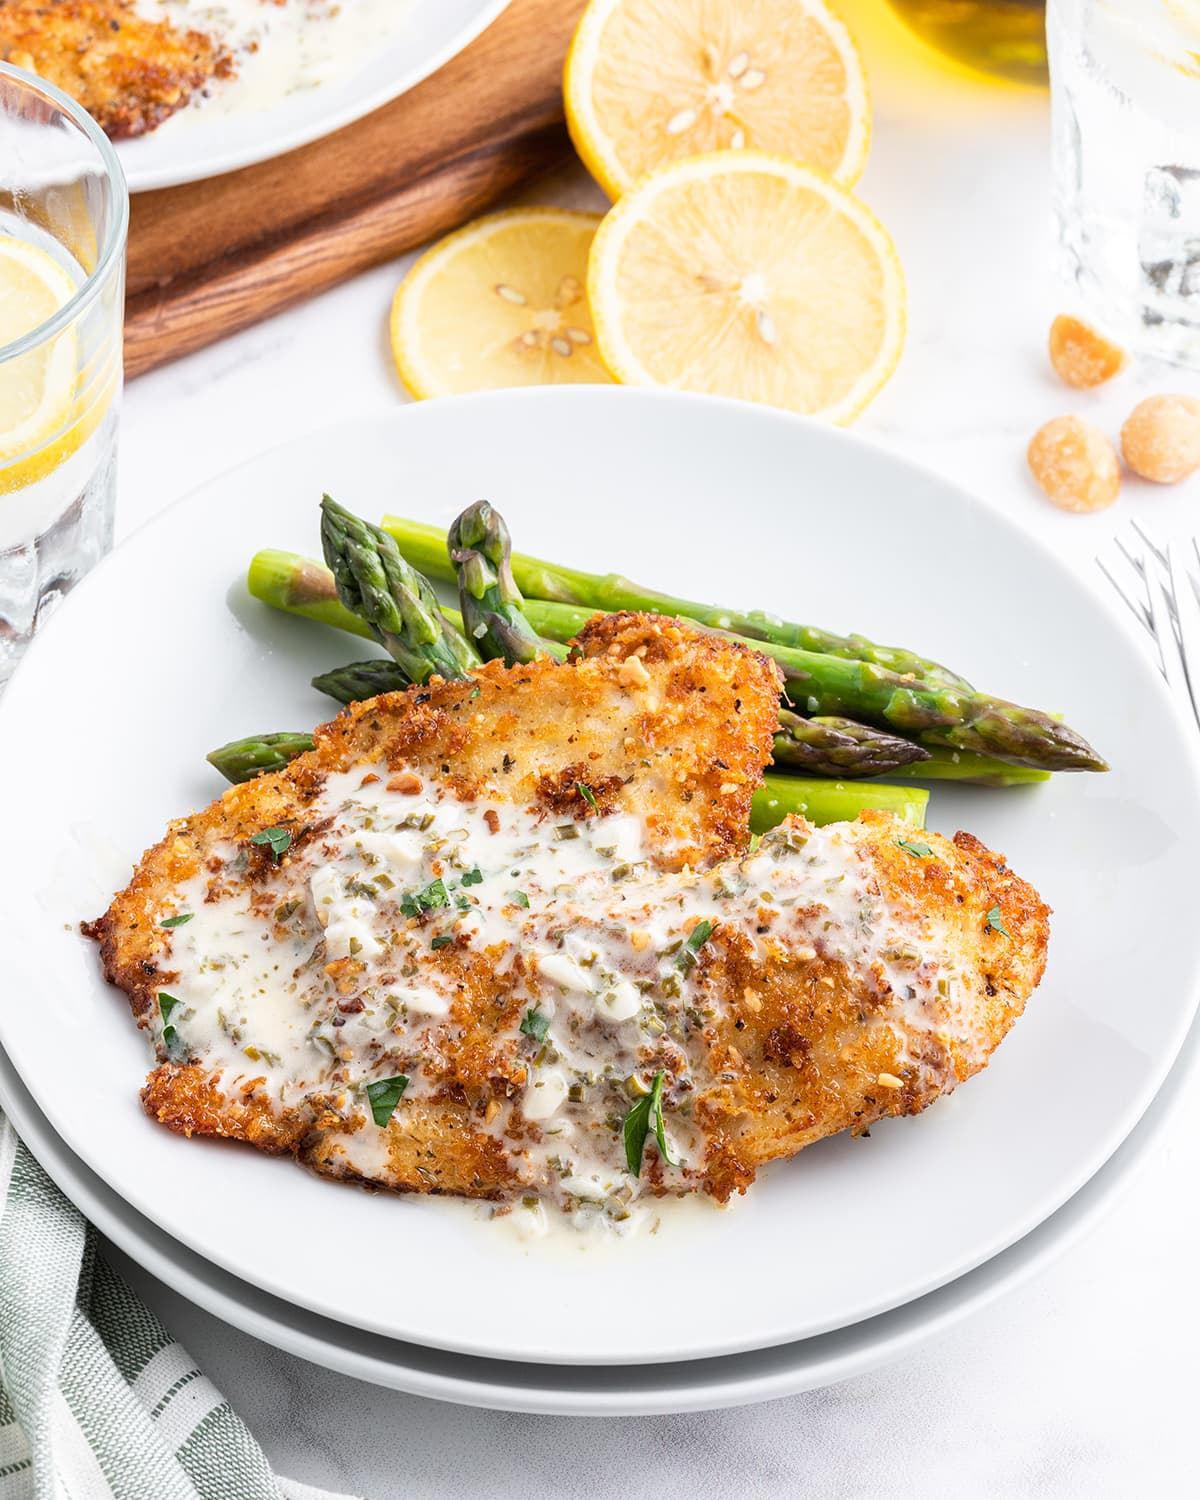 Tilapia on a plate with a golden brown crust covering it, and it is topped with a creamy white herb sauce, and laying next to asparagus on a plate.